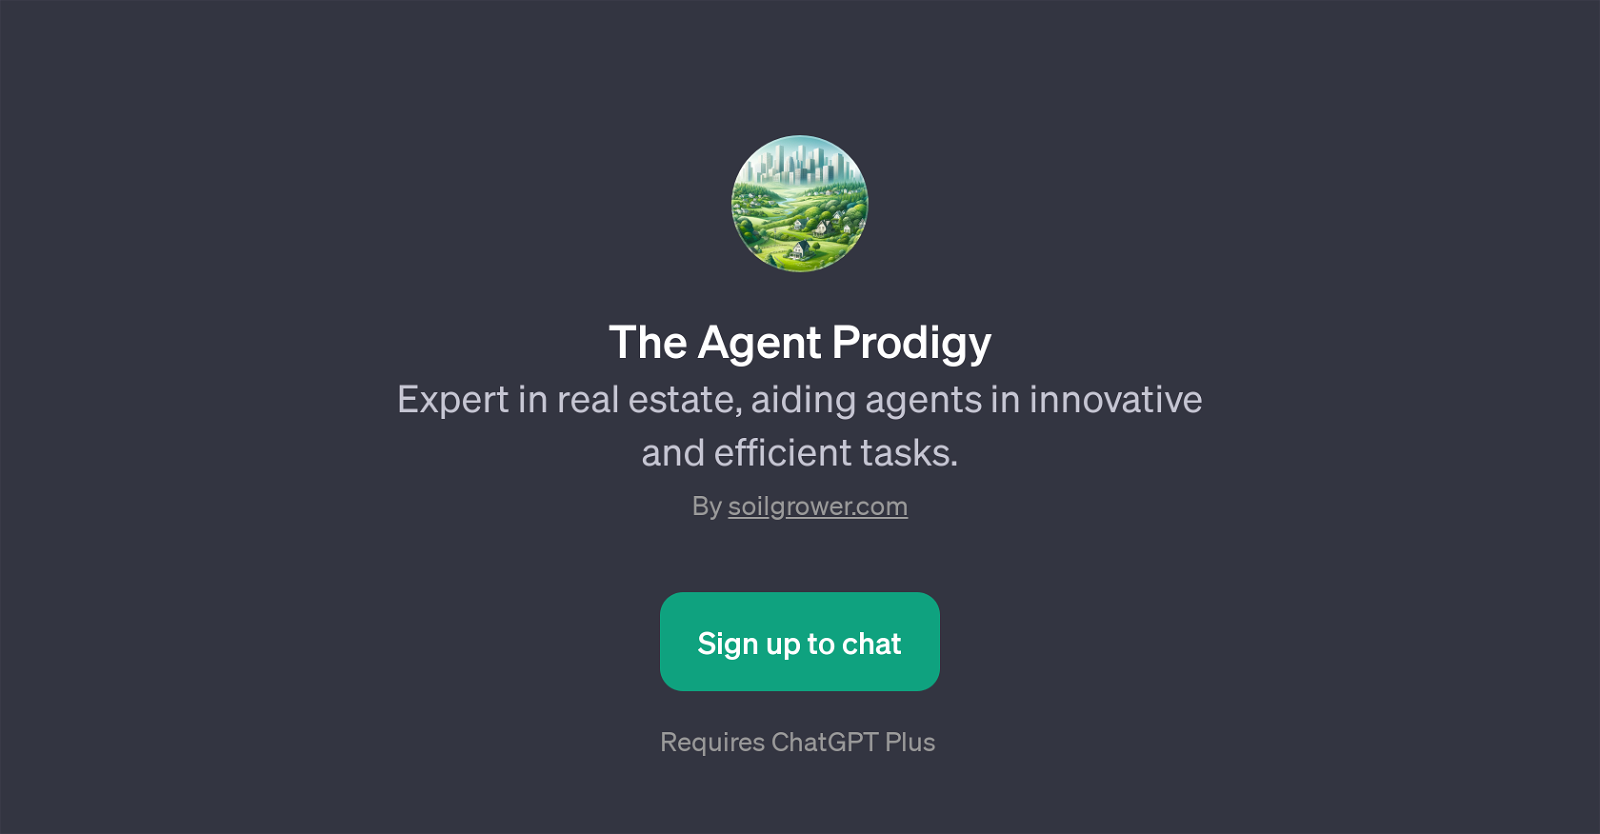 The Agent Prodigy website